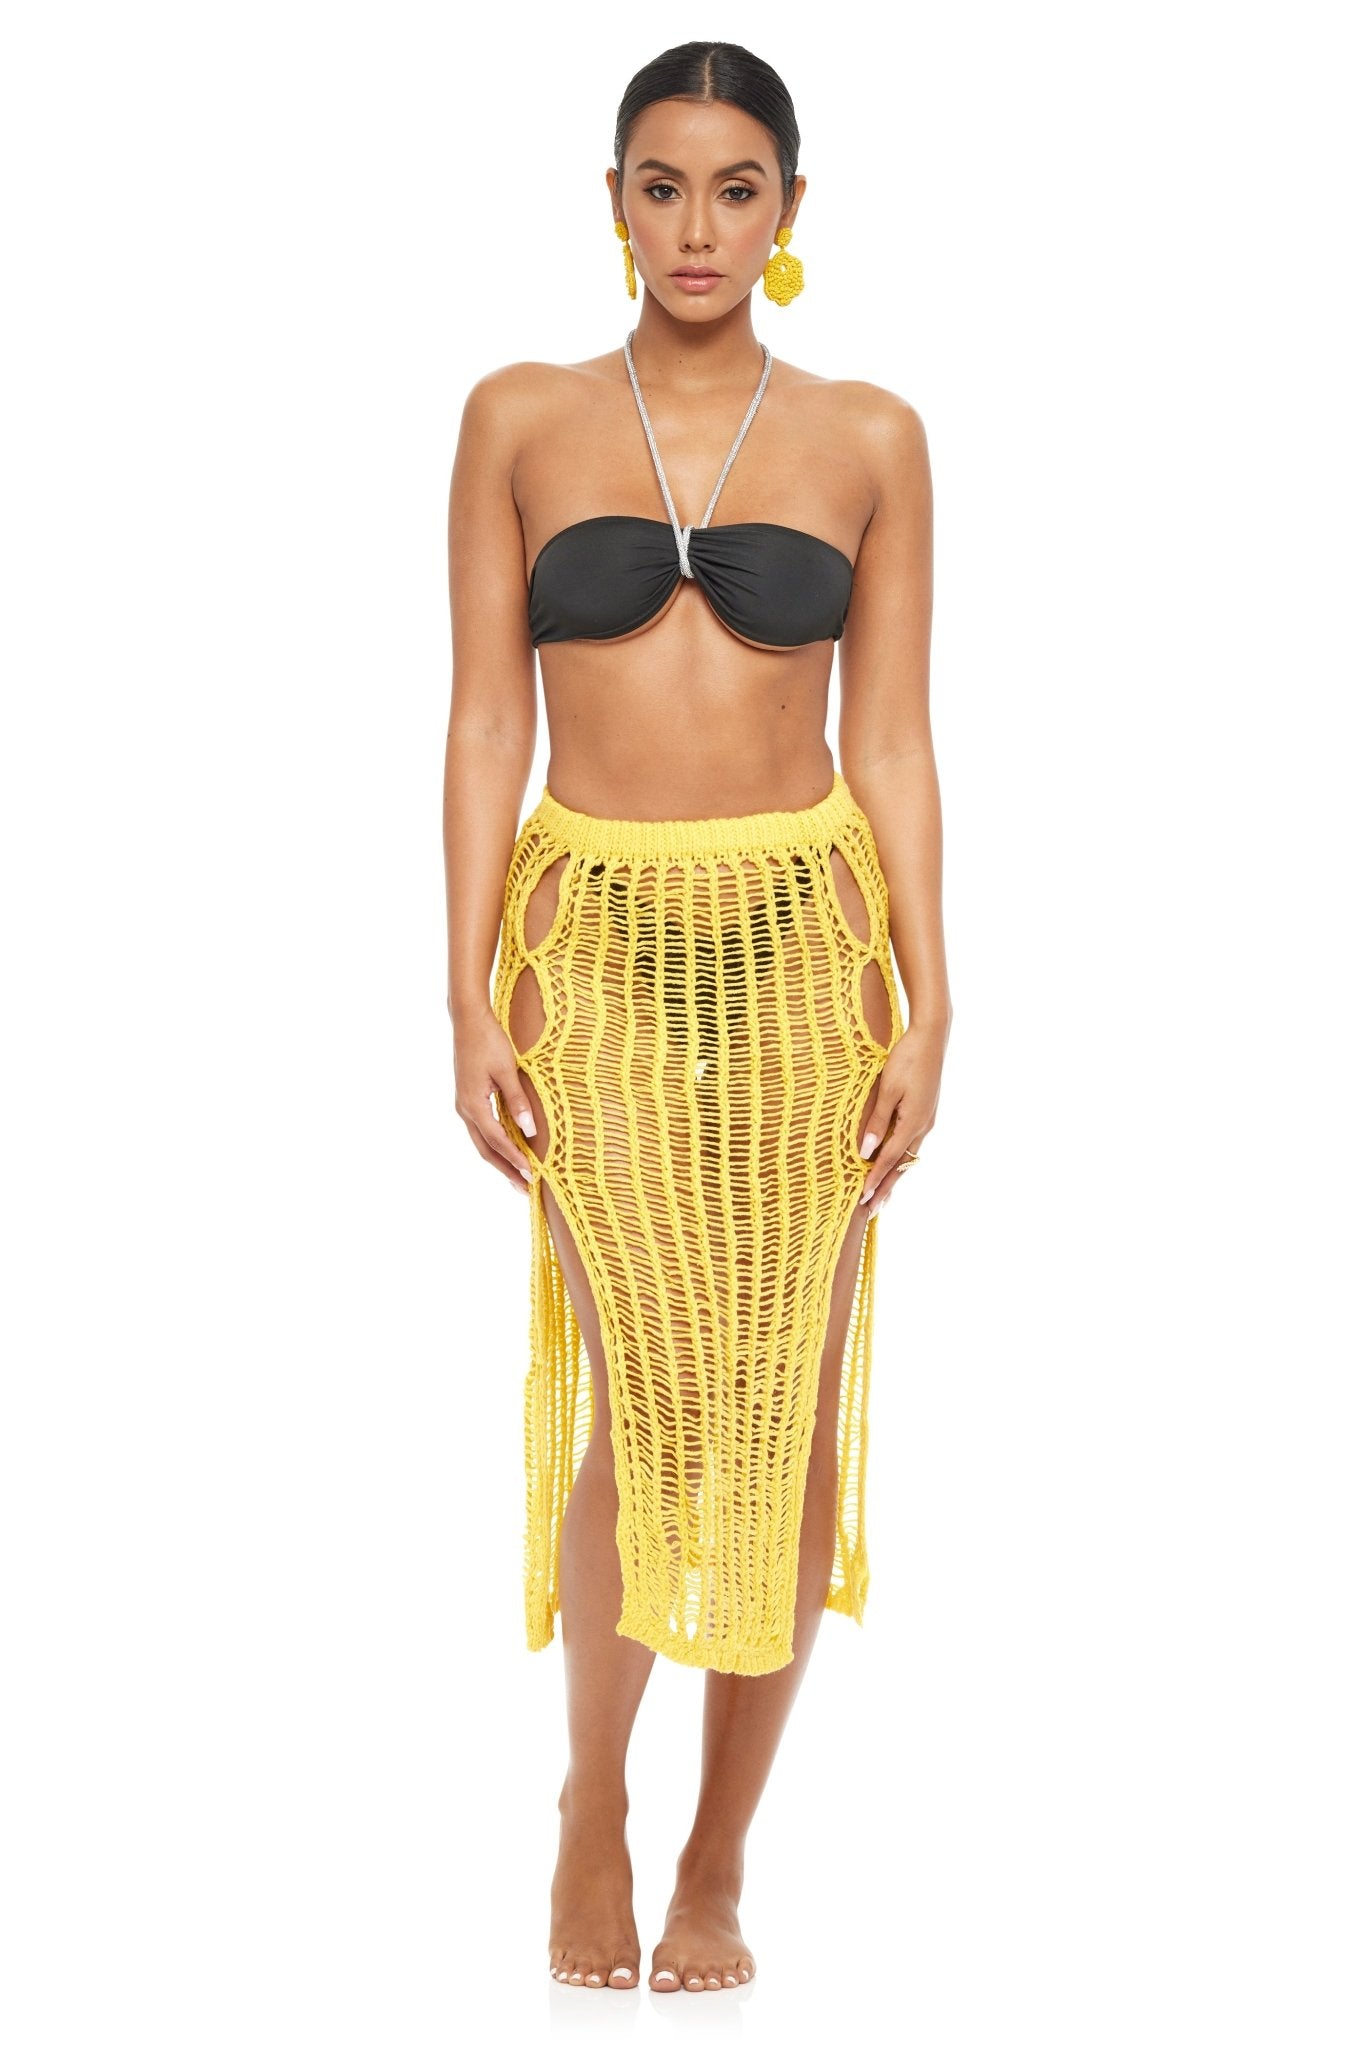 Cabo Knitted Skirt - YG COLLECTION